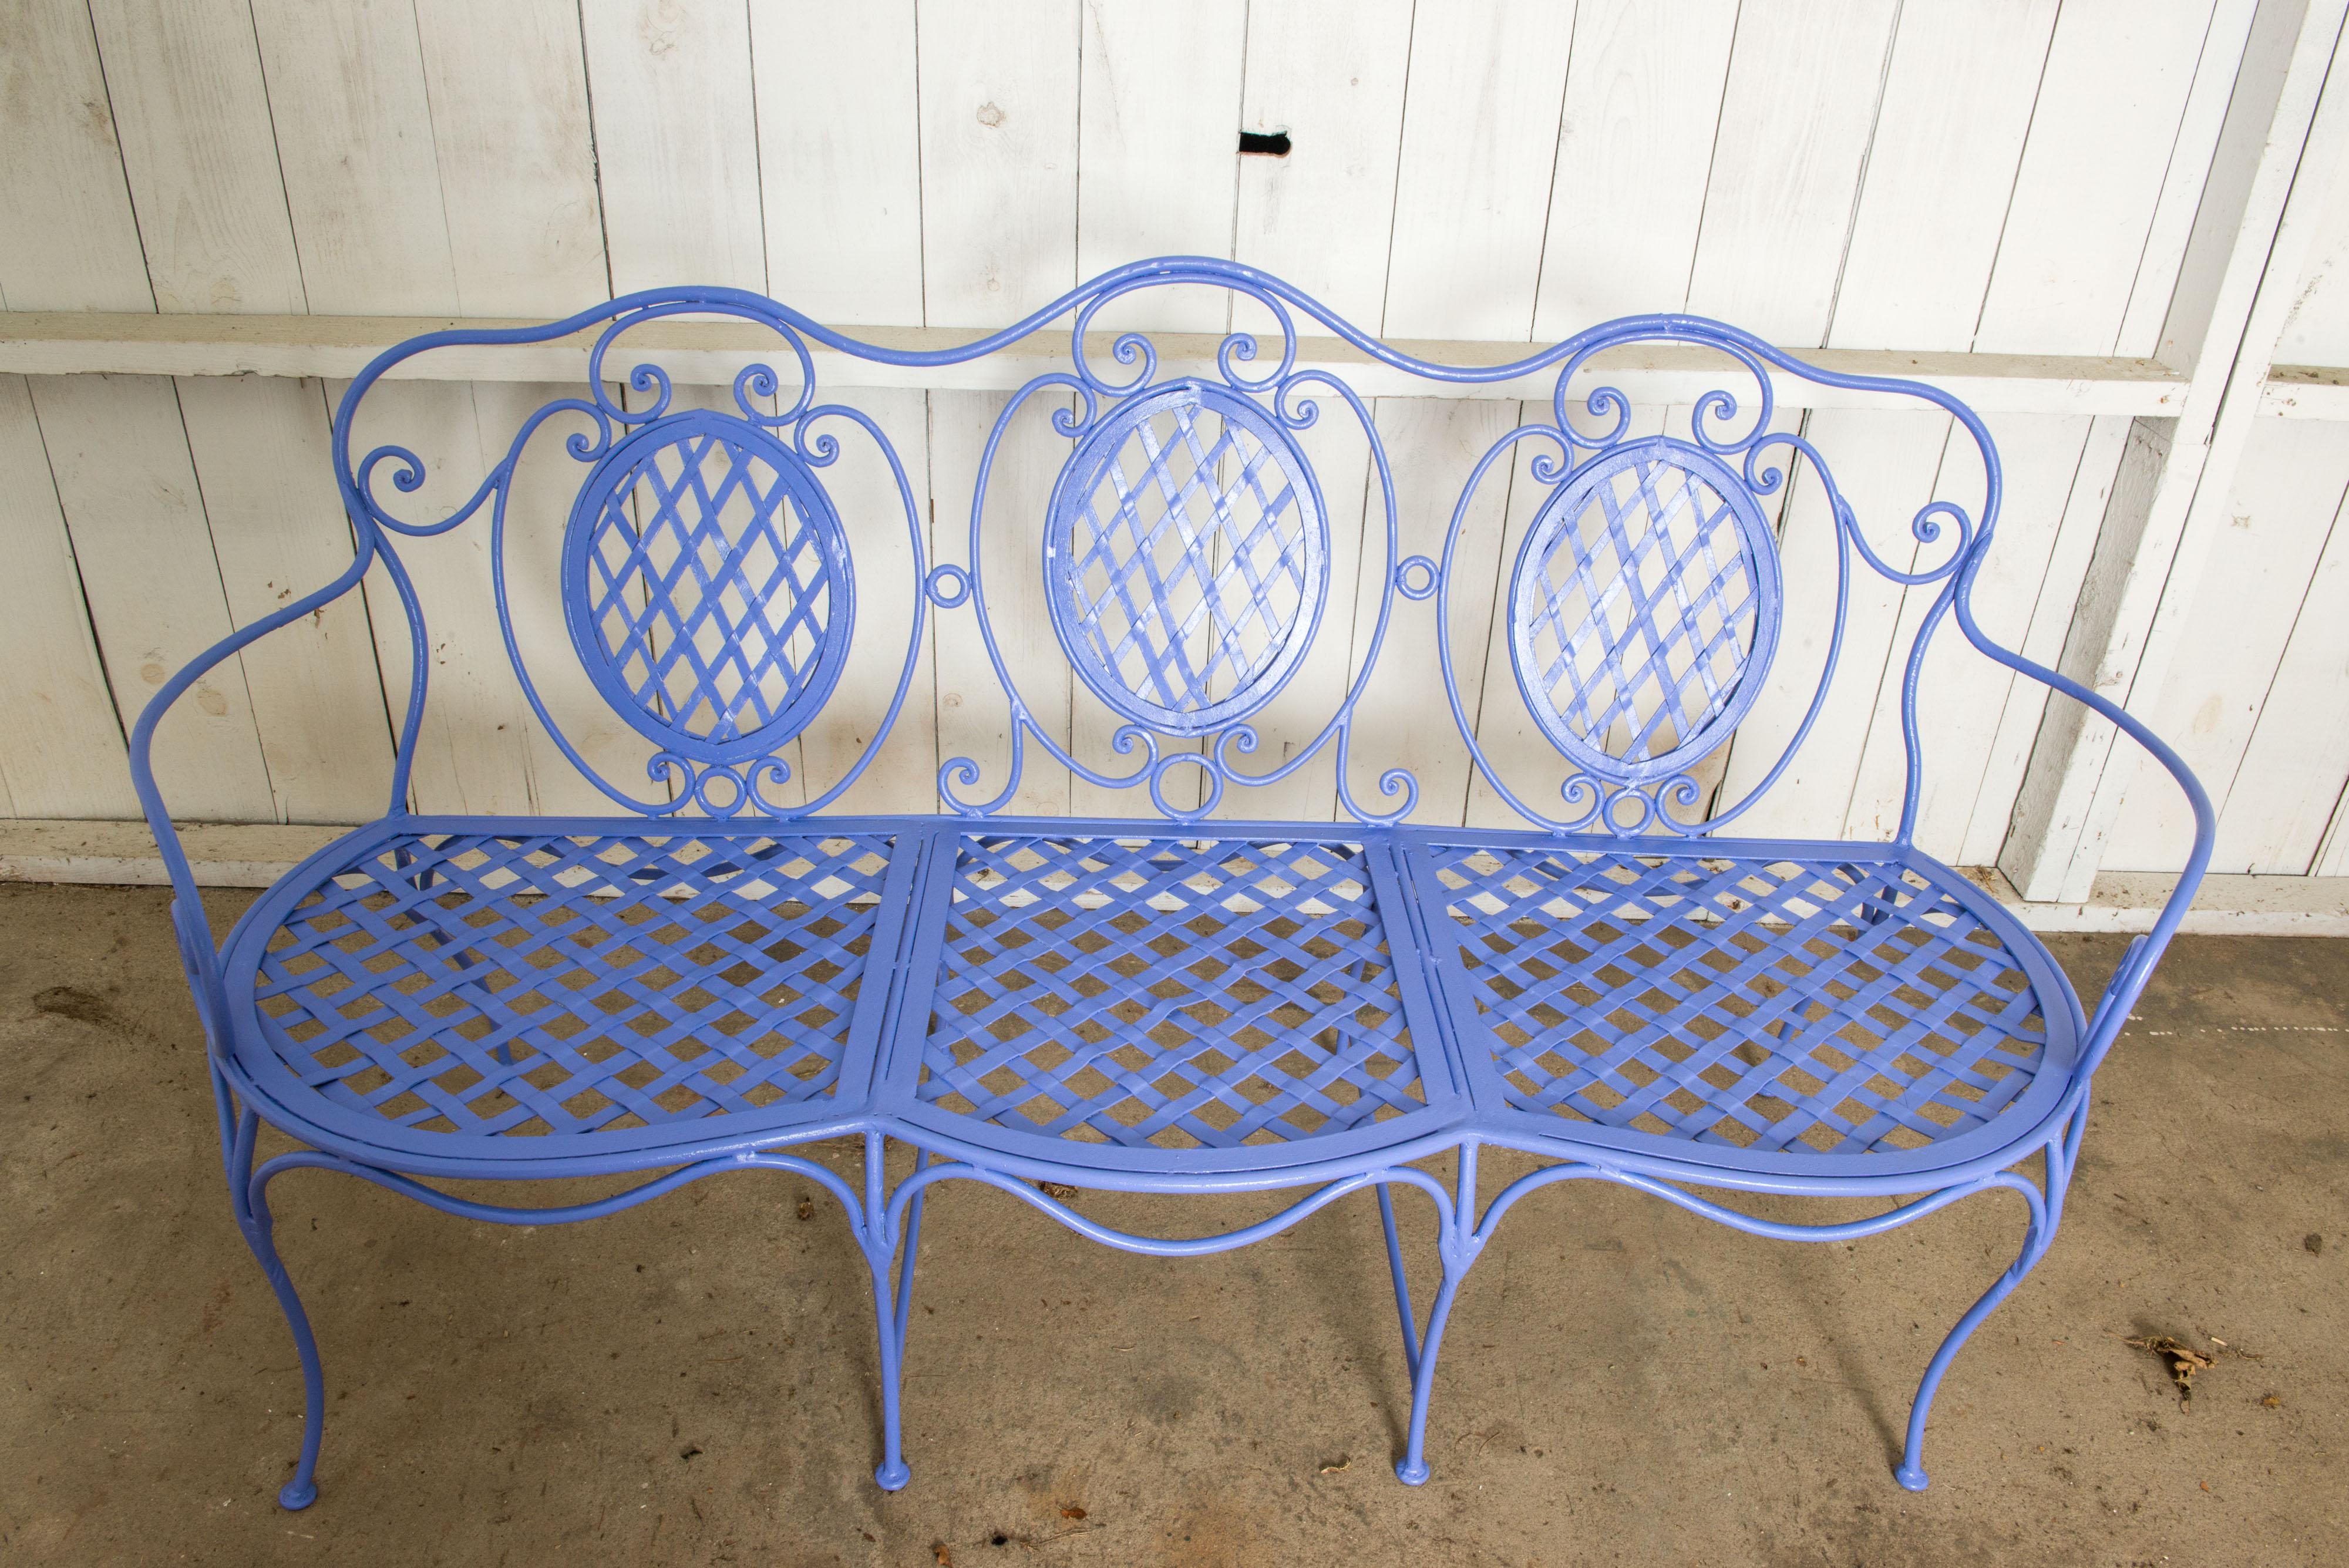 Baroque Revival Wrought Iron Garden Bench, Periwinkle For Sale